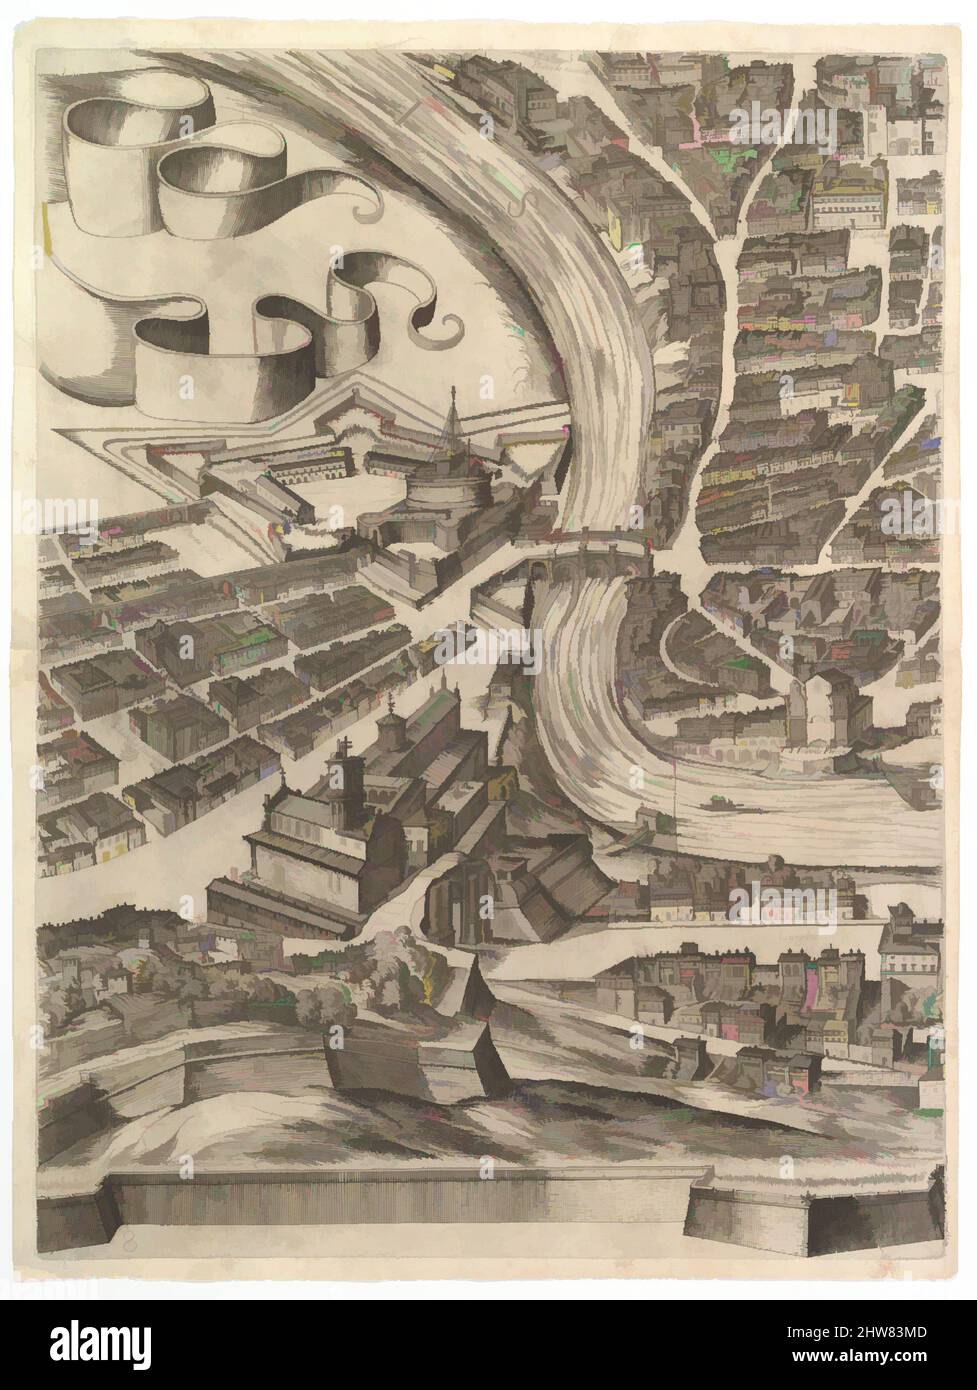 Art inspired by Plan of the City of Rome. Part 8 with the Castel Sant'Angelo, 1645, Etching with some engraving, undescribed state., Sheet: 21 x 16 5/16 in. (53.3 x 41.5 cm), Prints, Antonio Tempesta (Italian, Florence 1555–1630 Rome), Part of the lower half of the map showing a, Classic works modernized by Artotop with a splash of modernity. Shapes, color and value, eye-catching visual impact on art. Emotions through freedom of artworks in a contemporary way. A timeless message pursuing a wildly creative new direction. Artists turning to the digital medium and creating the Artotop NFT Stock Photo